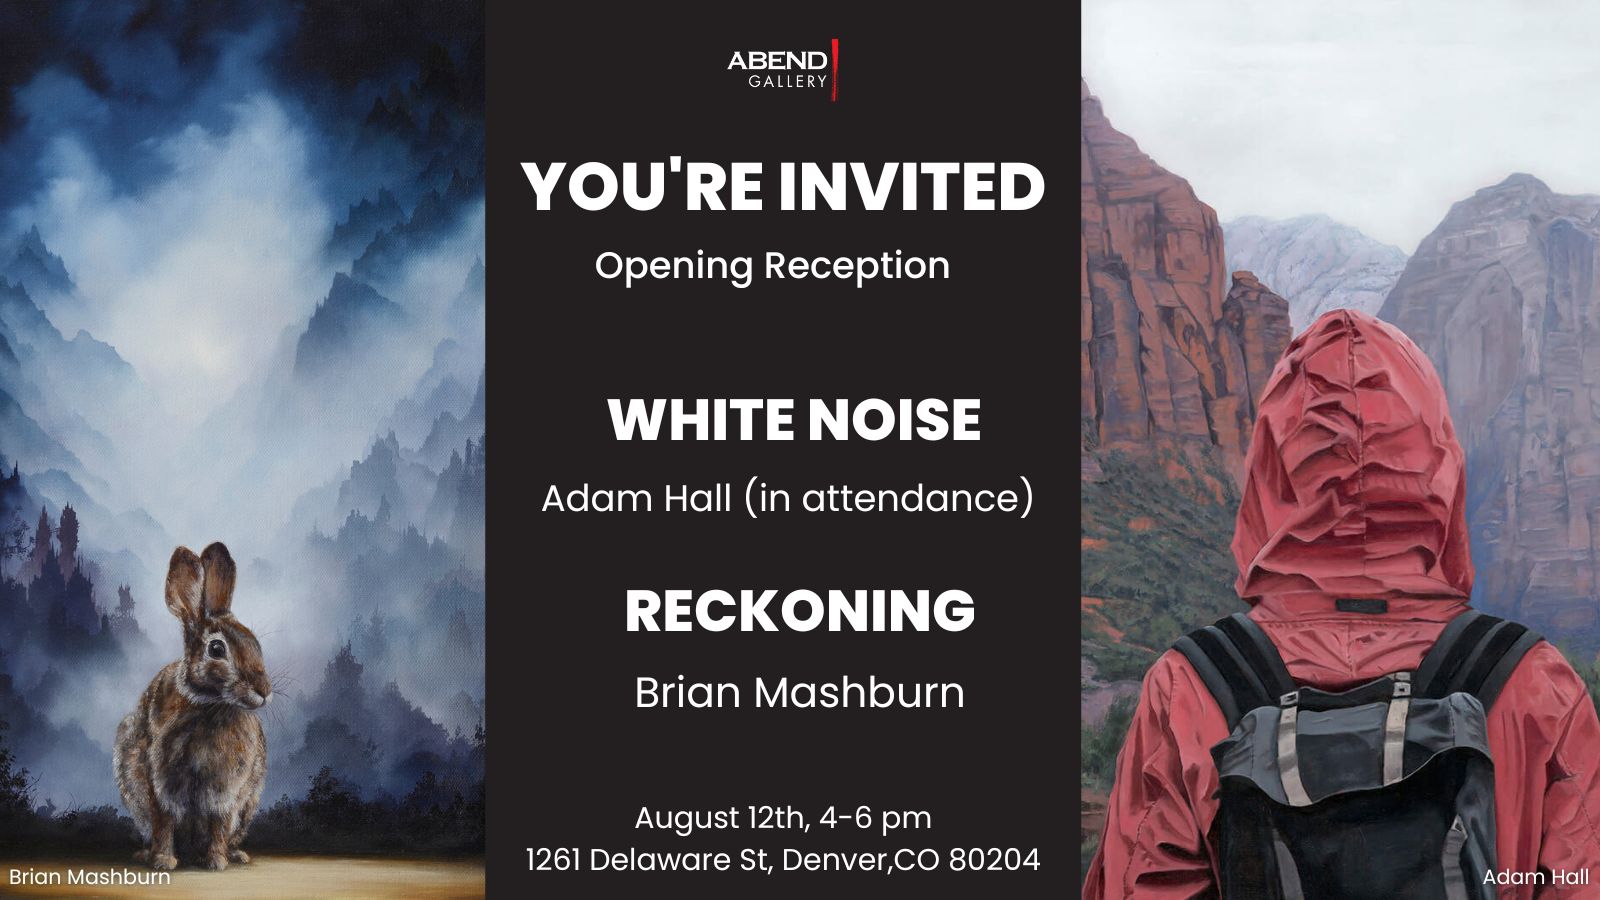 White Noise and Reckoning: Dual Solo Exhibitions by Adam Hall and Brian Mashburn at Abend Gallery, Denver, Colorado, United States